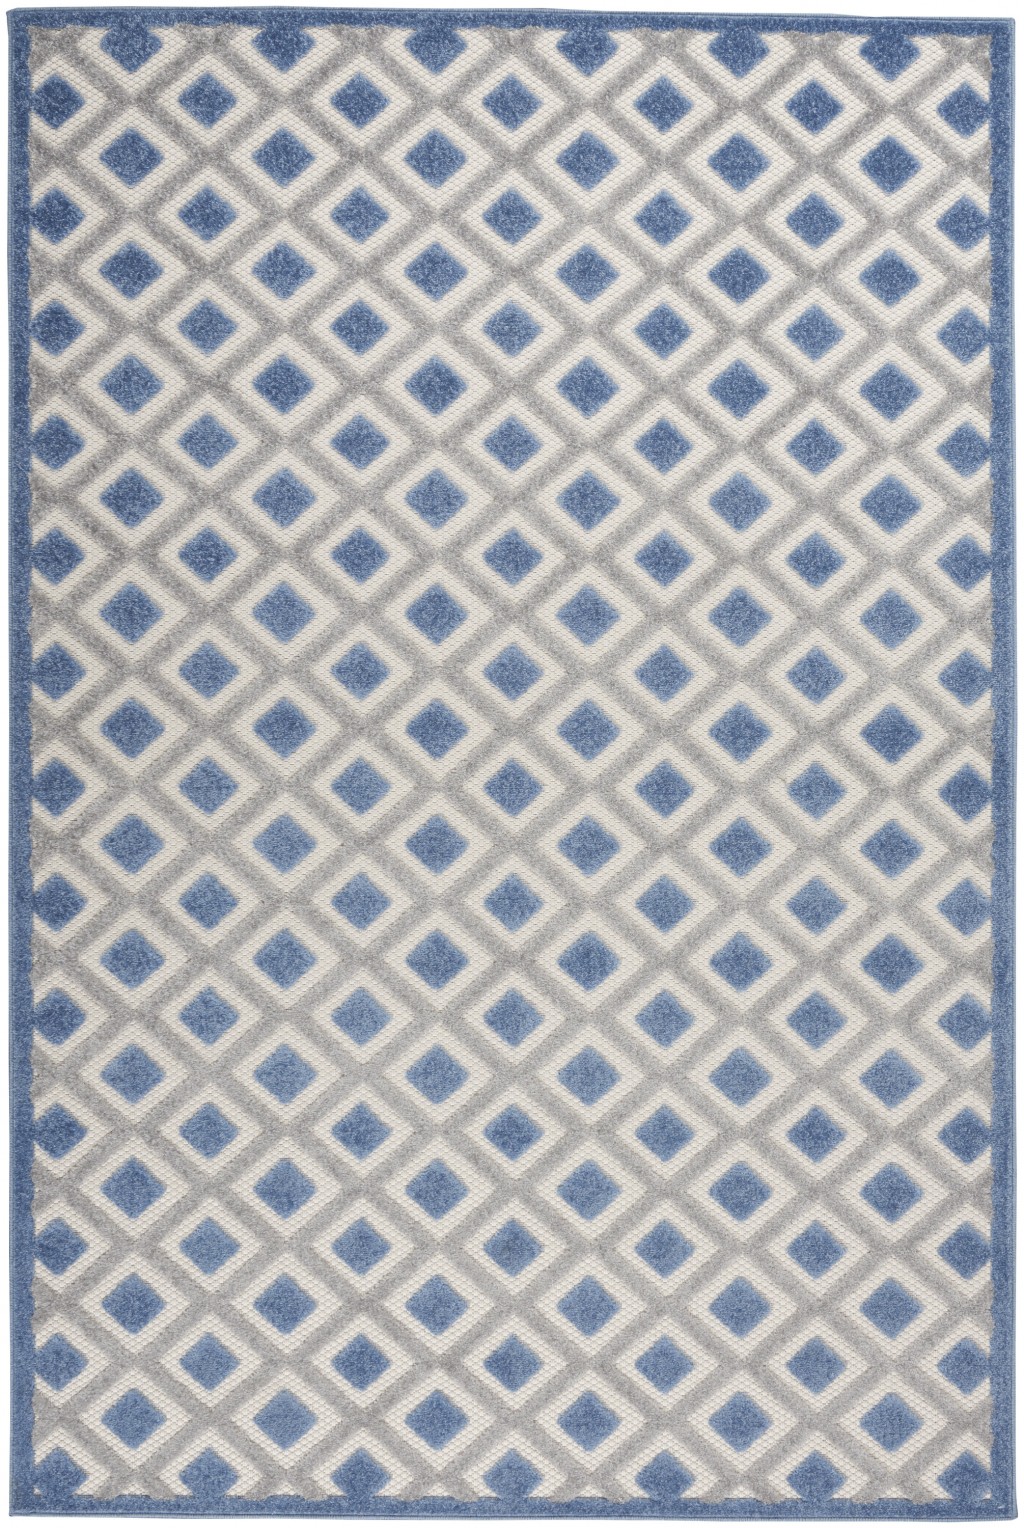 5' X 8' Blue And Gray Geometric Indoor Outdoor Area Rug-385151-1